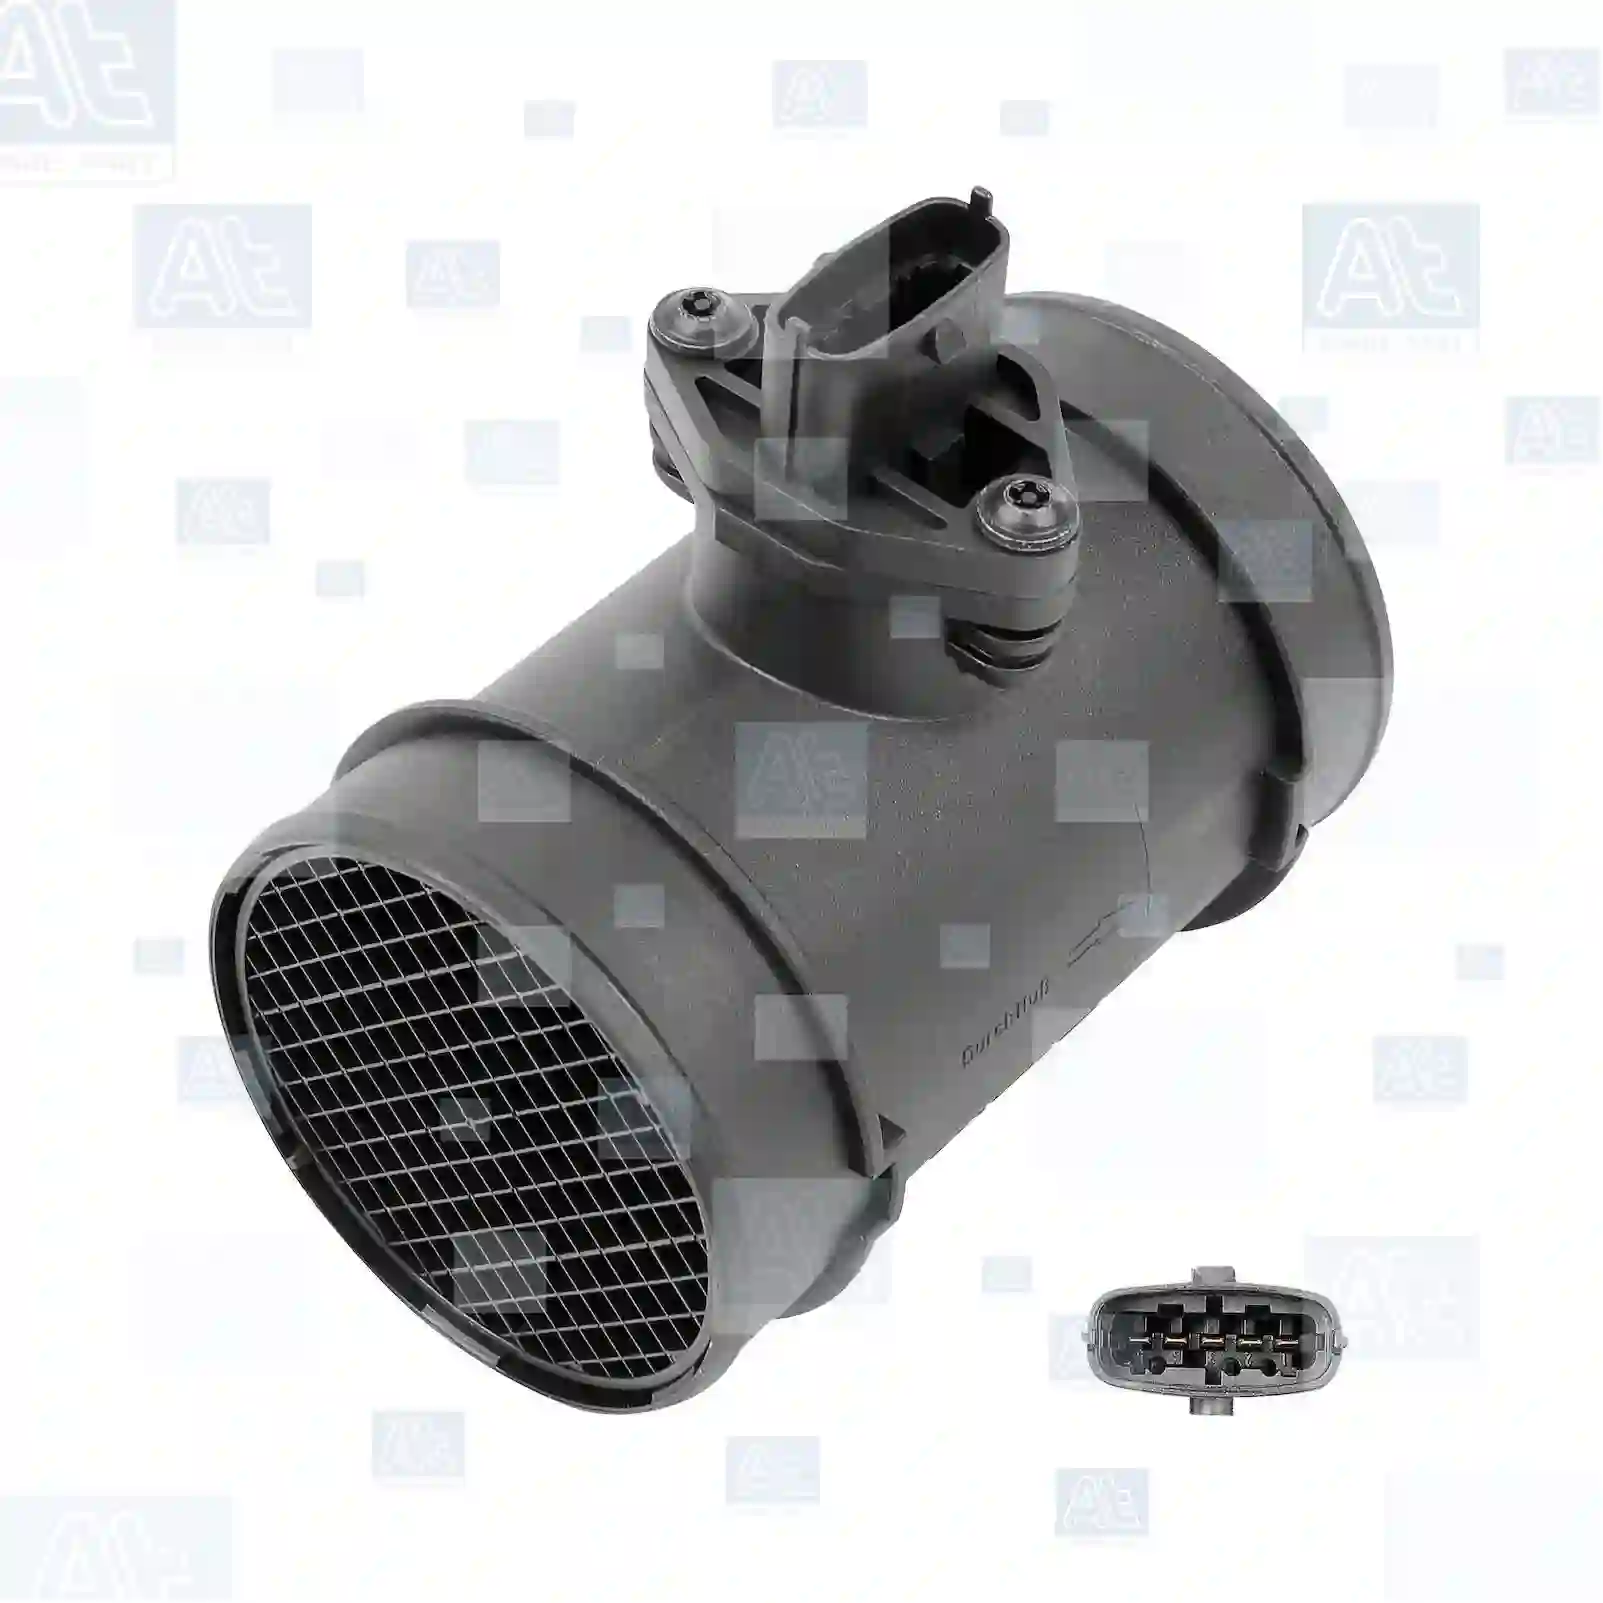 Air mass sensor, complete, 77706371, 1324369080, 13243690, 46444287, 46469917, 60663029, 60815616, 717359980, 90528435, 00001192W5, 1192W5, 1324369080, 171707, 46444287, 517745310, 60815616, 717359980, 1324369080, 13243690, 46444287, 517745310, 60815616, 717359980, 90528435, 9193533, 93171760, 90528435, 135098, 2505098, 836585, 836593, 16400-PDD-X00, 16400-PFT-E00, 28100-35400, 28100-39000, 500332364, 504051082, 28100-35400, 28100-39000, 1324369080, 13243690, 46444287, 60815616, 717359980, MHK100850, MHK101070, 836585, 836593, 00001192W5, 1192W5, AMR5707, MHK100850, MHK101070, ZUA000060SLP, 4662888, 5166541, 5167879, 90528435 ||  77706371 At Spare Part | Engine, Accelerator Pedal, Camshaft, Connecting Rod, Crankcase, Crankshaft, Cylinder Head, Engine Suspension Mountings, Exhaust Manifold, Exhaust Gas Recirculation, Filter Kits, Flywheel Housing, General Overhaul Kits, Engine, Intake Manifold, Oil Cleaner, Oil Cooler, Oil Filter, Oil Pump, Oil Sump, Piston & Liner, Sensor & Switch, Timing Case, Turbocharger, Cooling System, Belt Tensioner, Coolant Filter, Coolant Pipe, Corrosion Prevention Agent, Drive, Expansion Tank, Fan, Intercooler, Monitors & Gauges, Radiator, Thermostat, V-Belt / Timing belt, Water Pump, Fuel System, Electronical Injector Unit, Feed Pump, Fuel Filter, cpl., Fuel Gauge Sender,  Fuel Line, Fuel Pump, Fuel Tank, Injection Line Kit, Injection Pump, Exhaust System, Clutch & Pedal, Gearbox, Propeller Shaft, Axles, Brake System, Hubs & Wheels, Suspension, Leaf Spring, Universal Parts / Accessories, Steering, Electrical System, Cabin Air mass sensor, complete, 77706371, 1324369080, 13243690, 46444287, 46469917, 60663029, 60815616, 717359980, 90528435, 00001192W5, 1192W5, 1324369080, 171707, 46444287, 517745310, 60815616, 717359980, 1324369080, 13243690, 46444287, 517745310, 60815616, 717359980, 90528435, 9193533, 93171760, 90528435, 135098, 2505098, 836585, 836593, 16400-PDD-X00, 16400-PFT-E00, 28100-35400, 28100-39000, 500332364, 504051082, 28100-35400, 28100-39000, 1324369080, 13243690, 46444287, 60815616, 717359980, MHK100850, MHK101070, 836585, 836593, 00001192W5, 1192W5, AMR5707, MHK100850, MHK101070, ZUA000060SLP, 4662888, 5166541, 5167879, 90528435 ||  77706371 At Spare Part | Engine, Accelerator Pedal, Camshaft, Connecting Rod, Crankcase, Crankshaft, Cylinder Head, Engine Suspension Mountings, Exhaust Manifold, Exhaust Gas Recirculation, Filter Kits, Flywheel Housing, General Overhaul Kits, Engine, Intake Manifold, Oil Cleaner, Oil Cooler, Oil Filter, Oil Pump, Oil Sump, Piston & Liner, Sensor & Switch, Timing Case, Turbocharger, Cooling System, Belt Tensioner, Coolant Filter, Coolant Pipe, Corrosion Prevention Agent, Drive, Expansion Tank, Fan, Intercooler, Monitors & Gauges, Radiator, Thermostat, V-Belt / Timing belt, Water Pump, Fuel System, Electronical Injector Unit, Feed Pump, Fuel Filter, cpl., Fuel Gauge Sender,  Fuel Line, Fuel Pump, Fuel Tank, Injection Line Kit, Injection Pump, Exhaust System, Clutch & Pedal, Gearbox, Propeller Shaft, Axles, Brake System, Hubs & Wheels, Suspension, Leaf Spring, Universal Parts / Accessories, Steering, Electrical System, Cabin